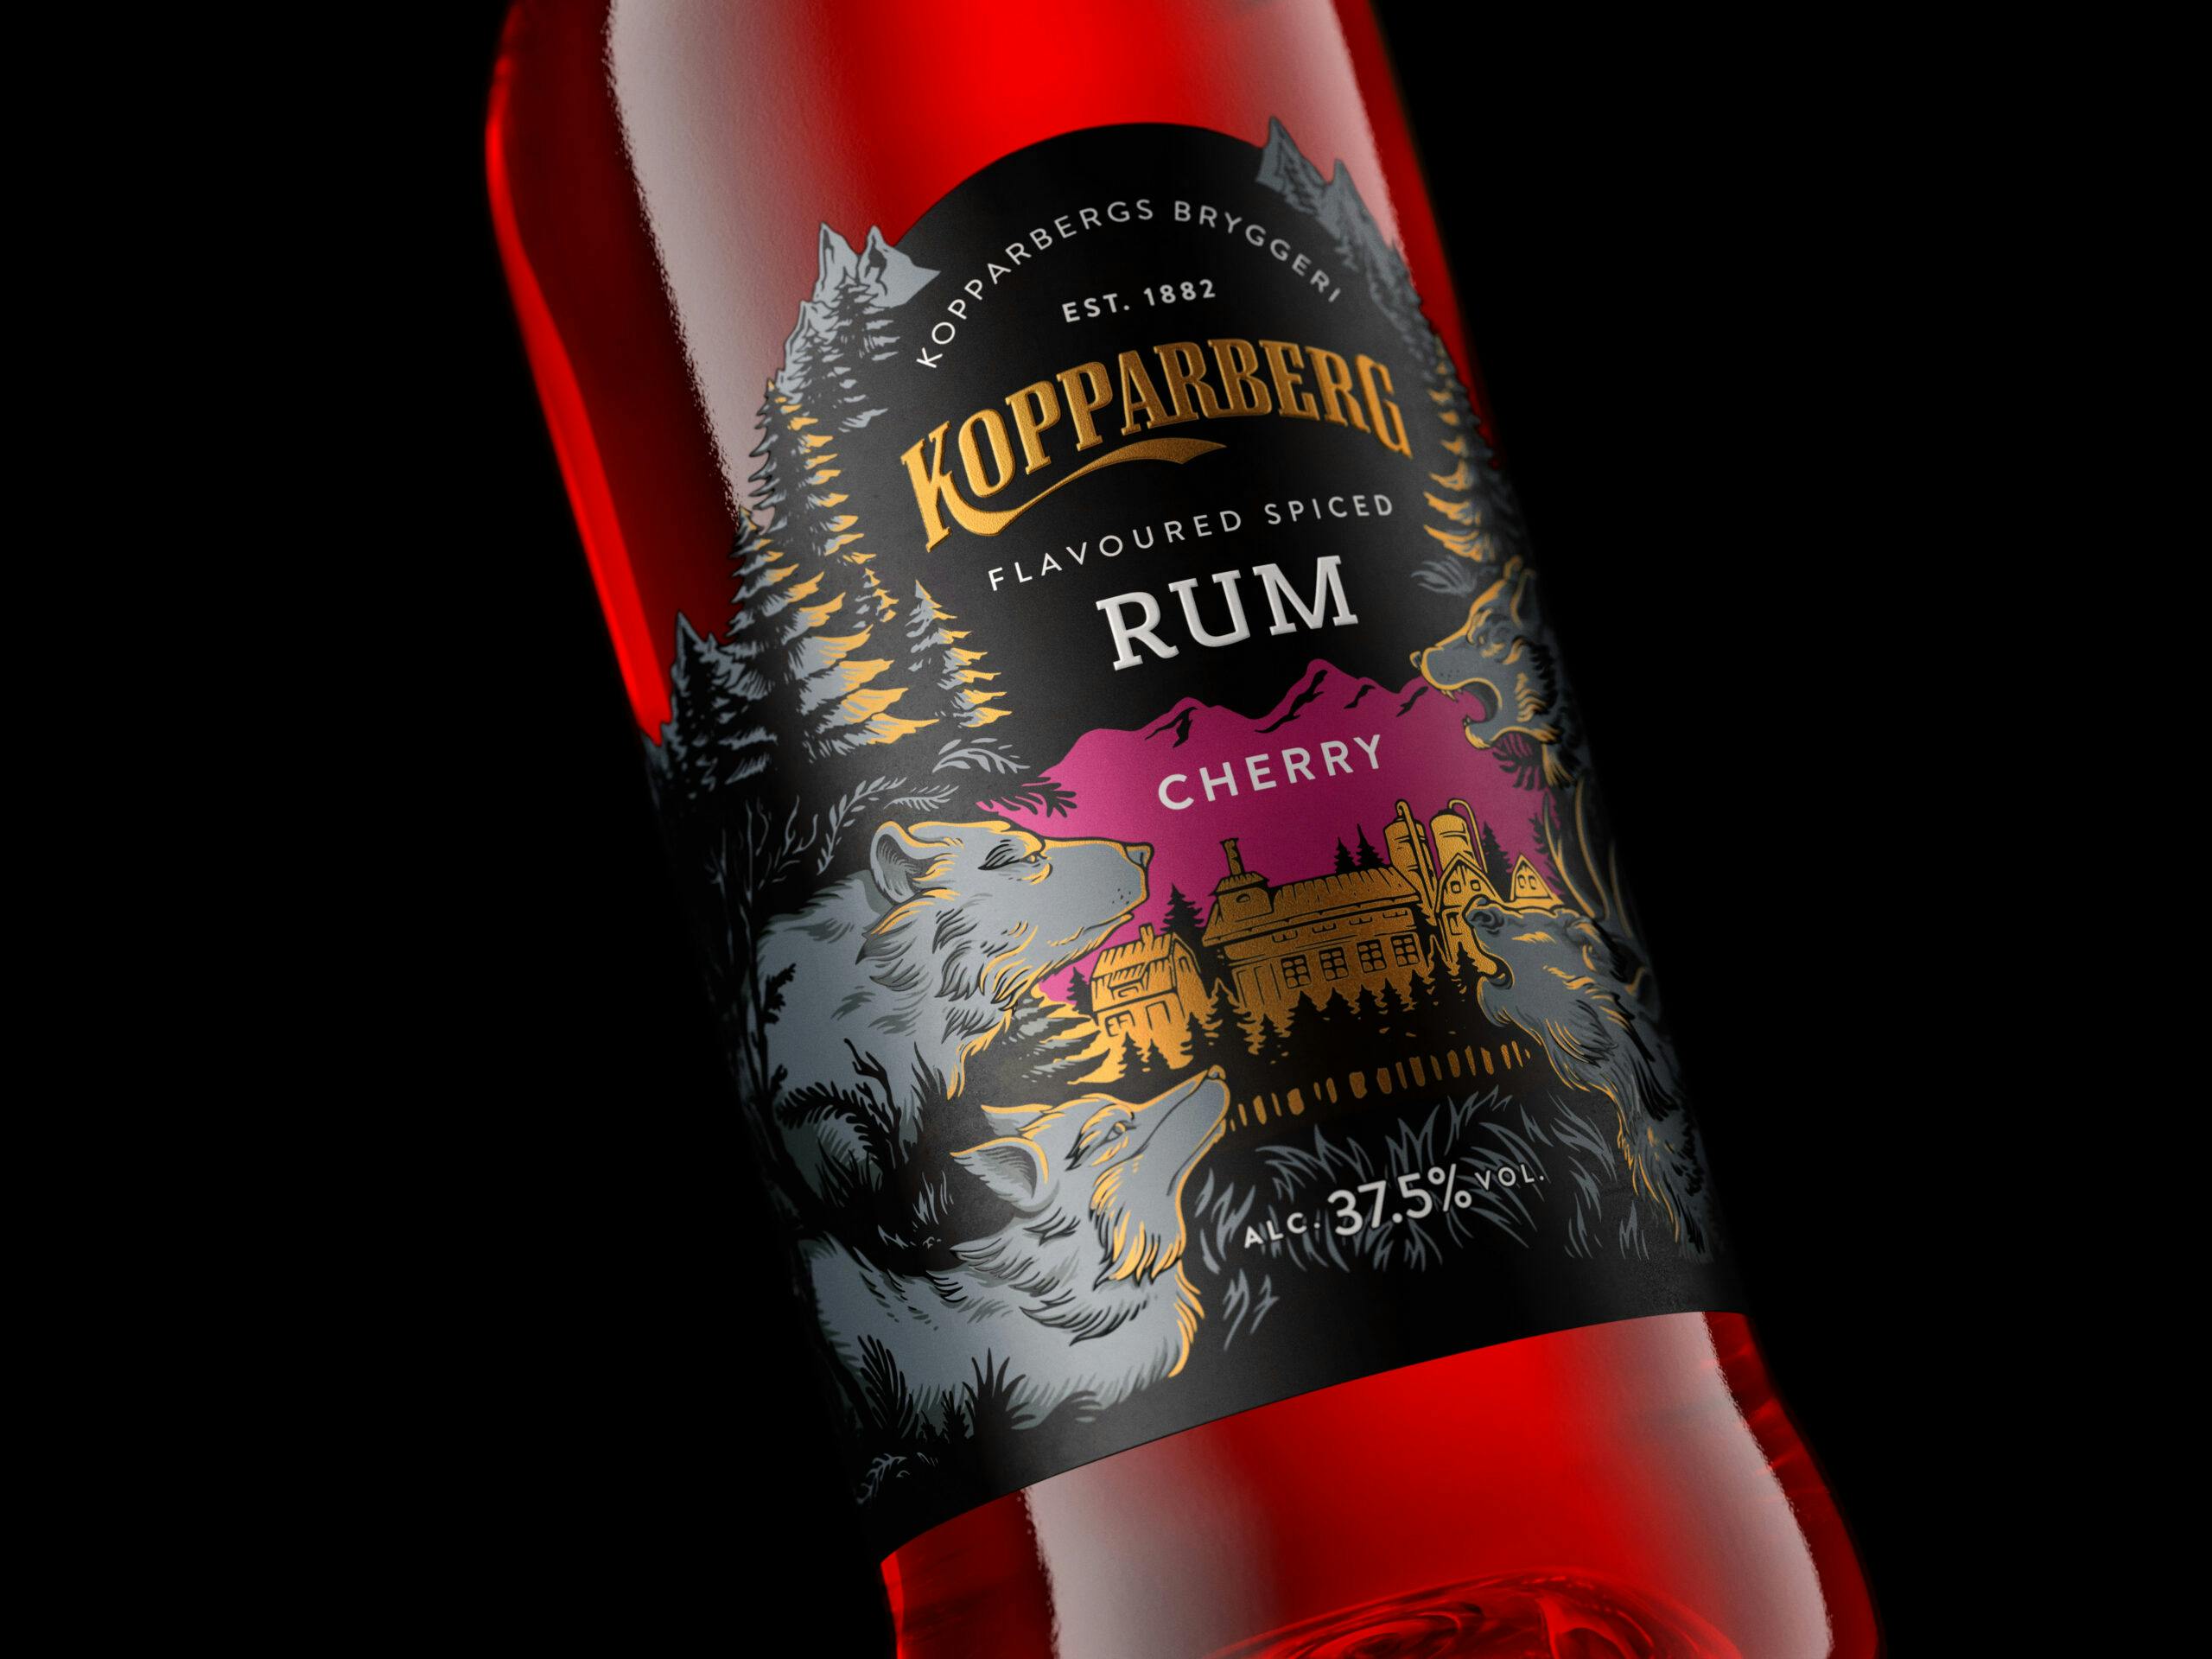 Image of Kopparberg Cherry Rum goes all the way with this highly embellished label